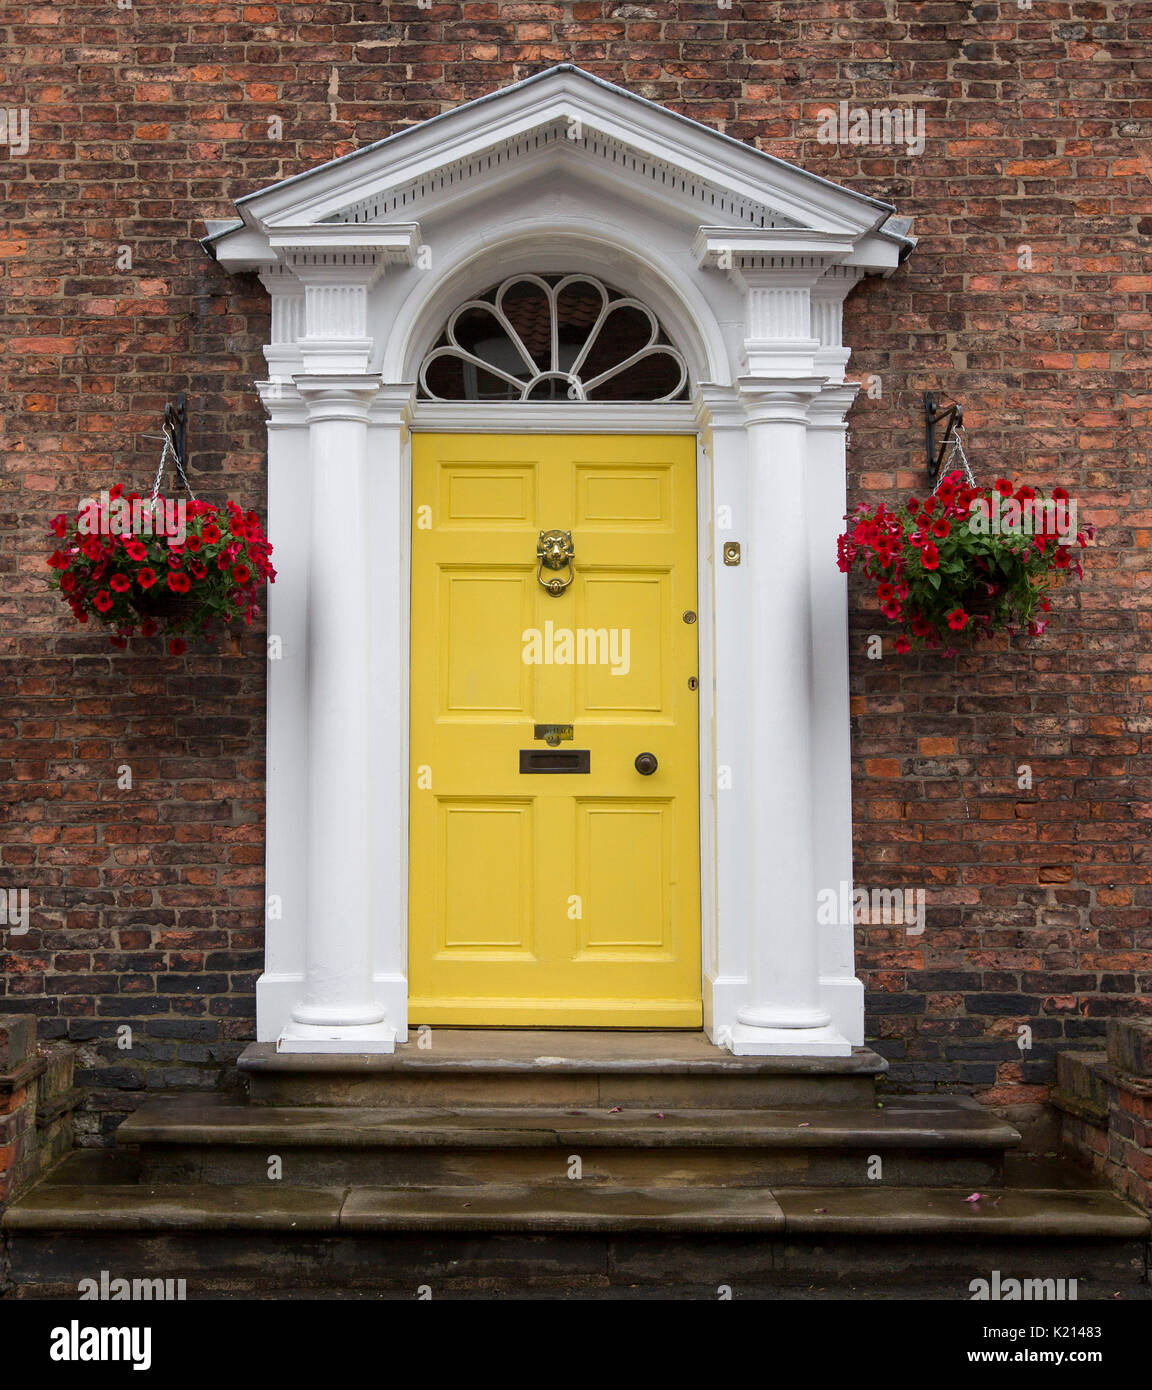 Yellow painted wooden door with white classic style frame bordered by hanging baskets of bright red flowers on dark brick wall Stock Photo